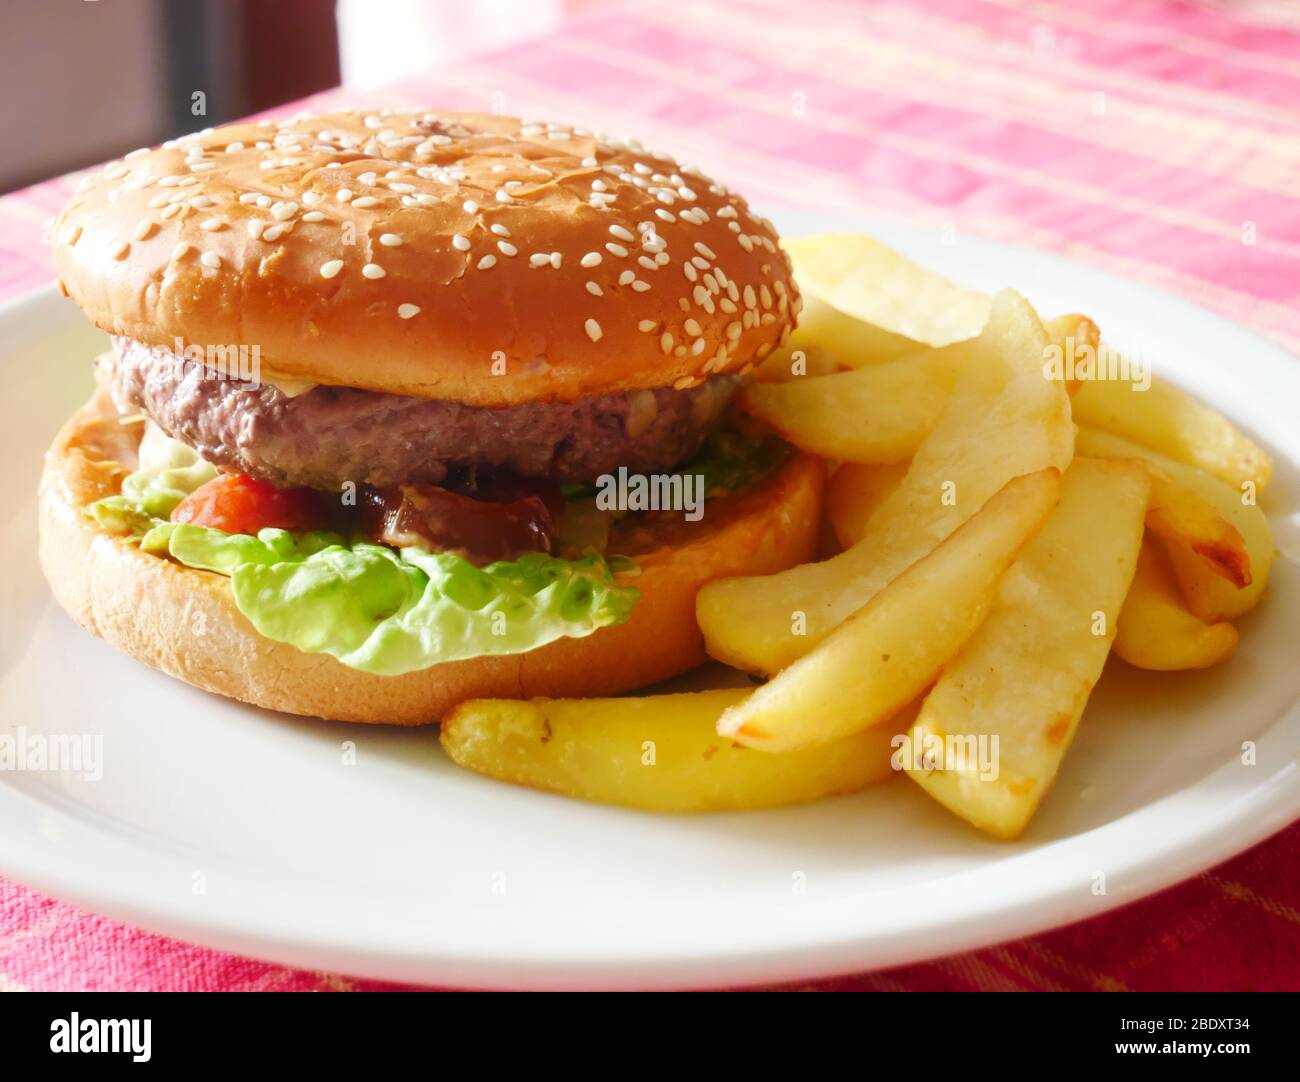 Close-up of an appetizing plate of hamburger and french fries Stock Photo